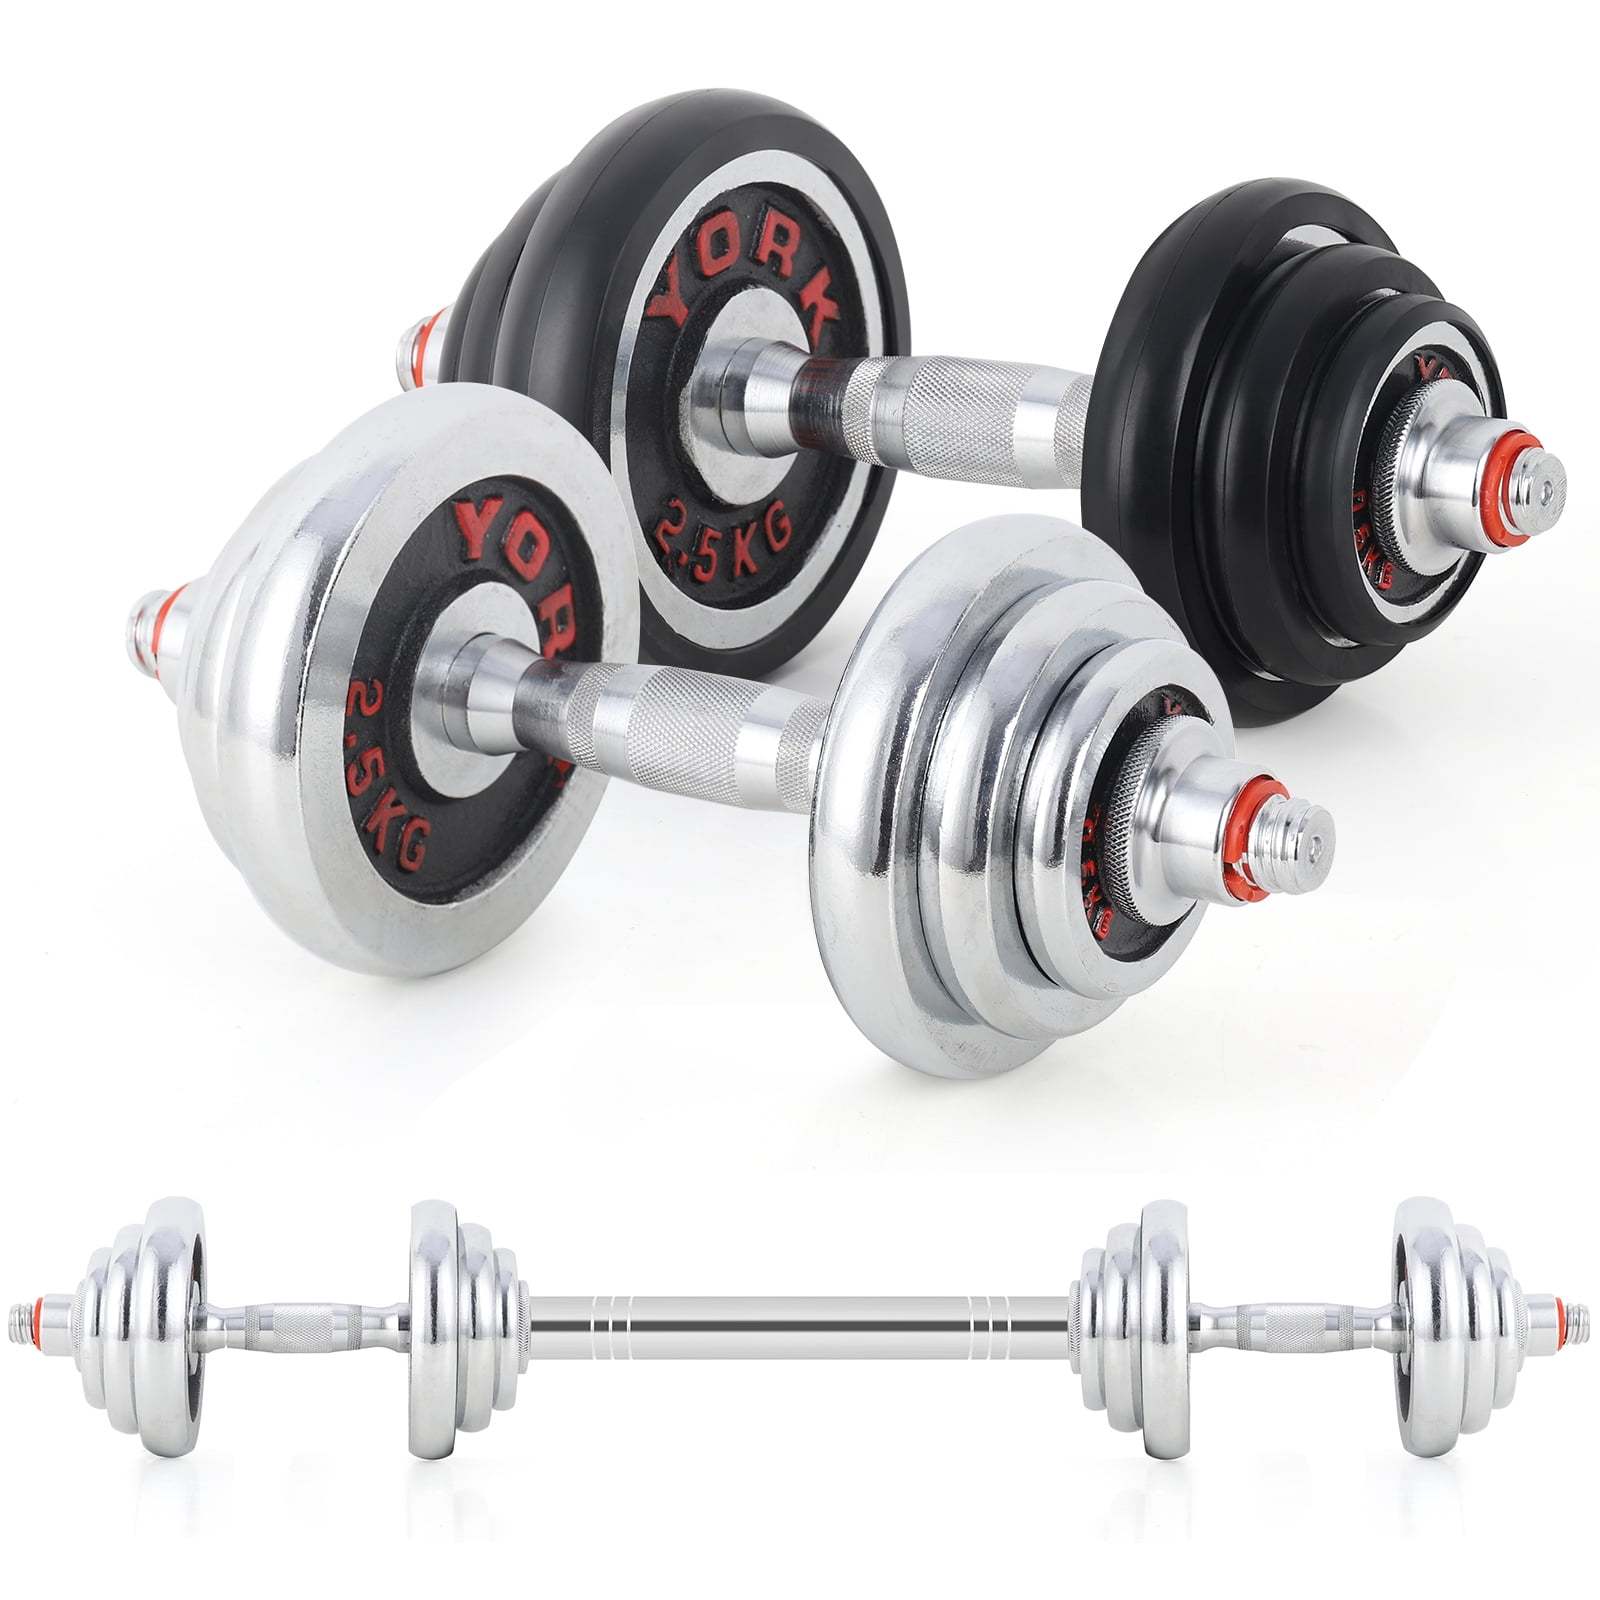 HTNBO Adjustable Weights Dumbbells Set Free Weights Set with Connecting Rod Home Indoor 